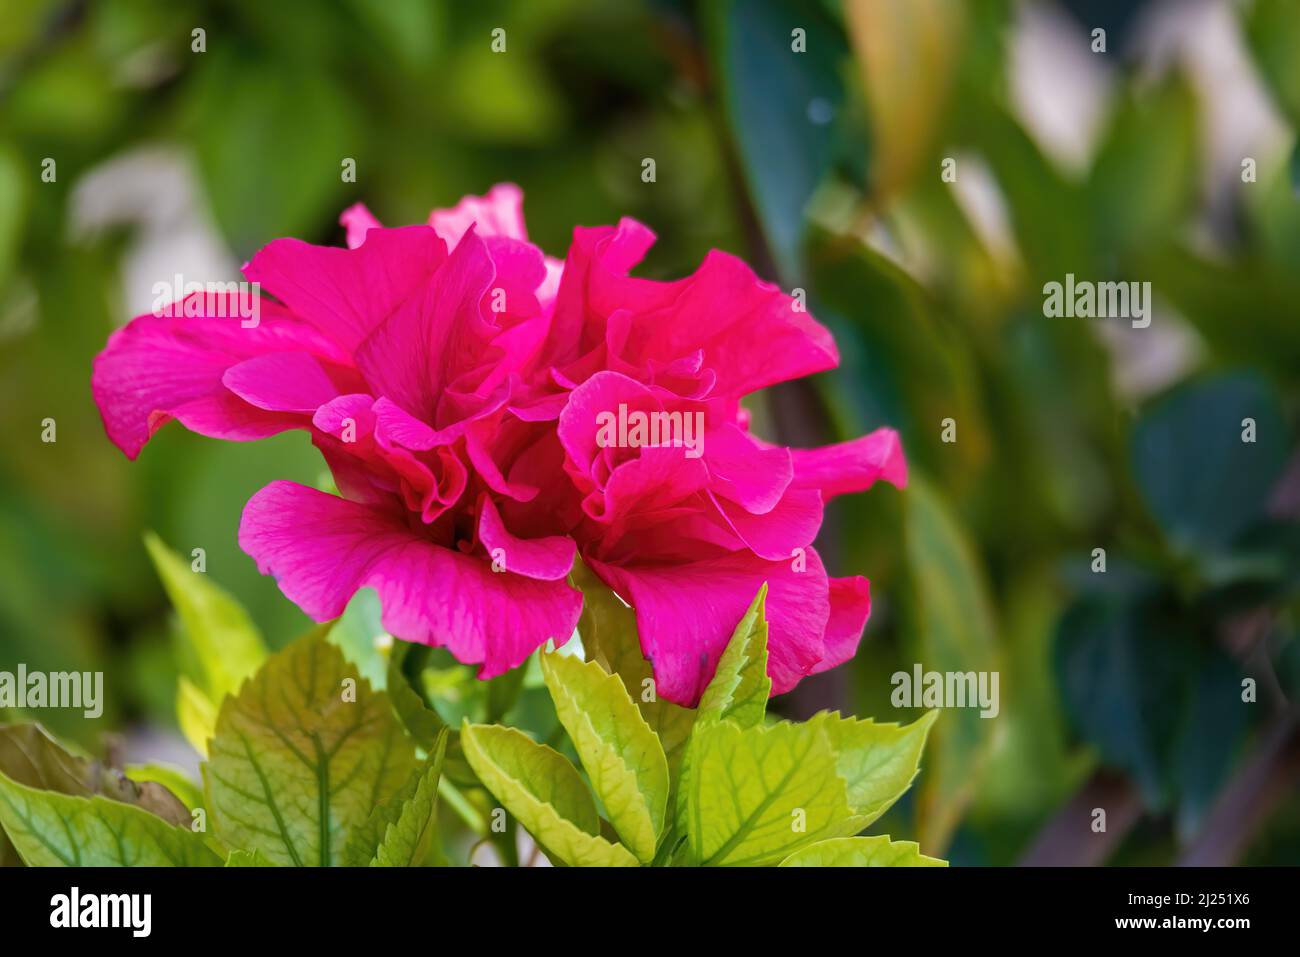 Beautiful tropical exotic red Bougainvillea flower blooming in the garden, Ethiopia nature, Africa Stock Photo